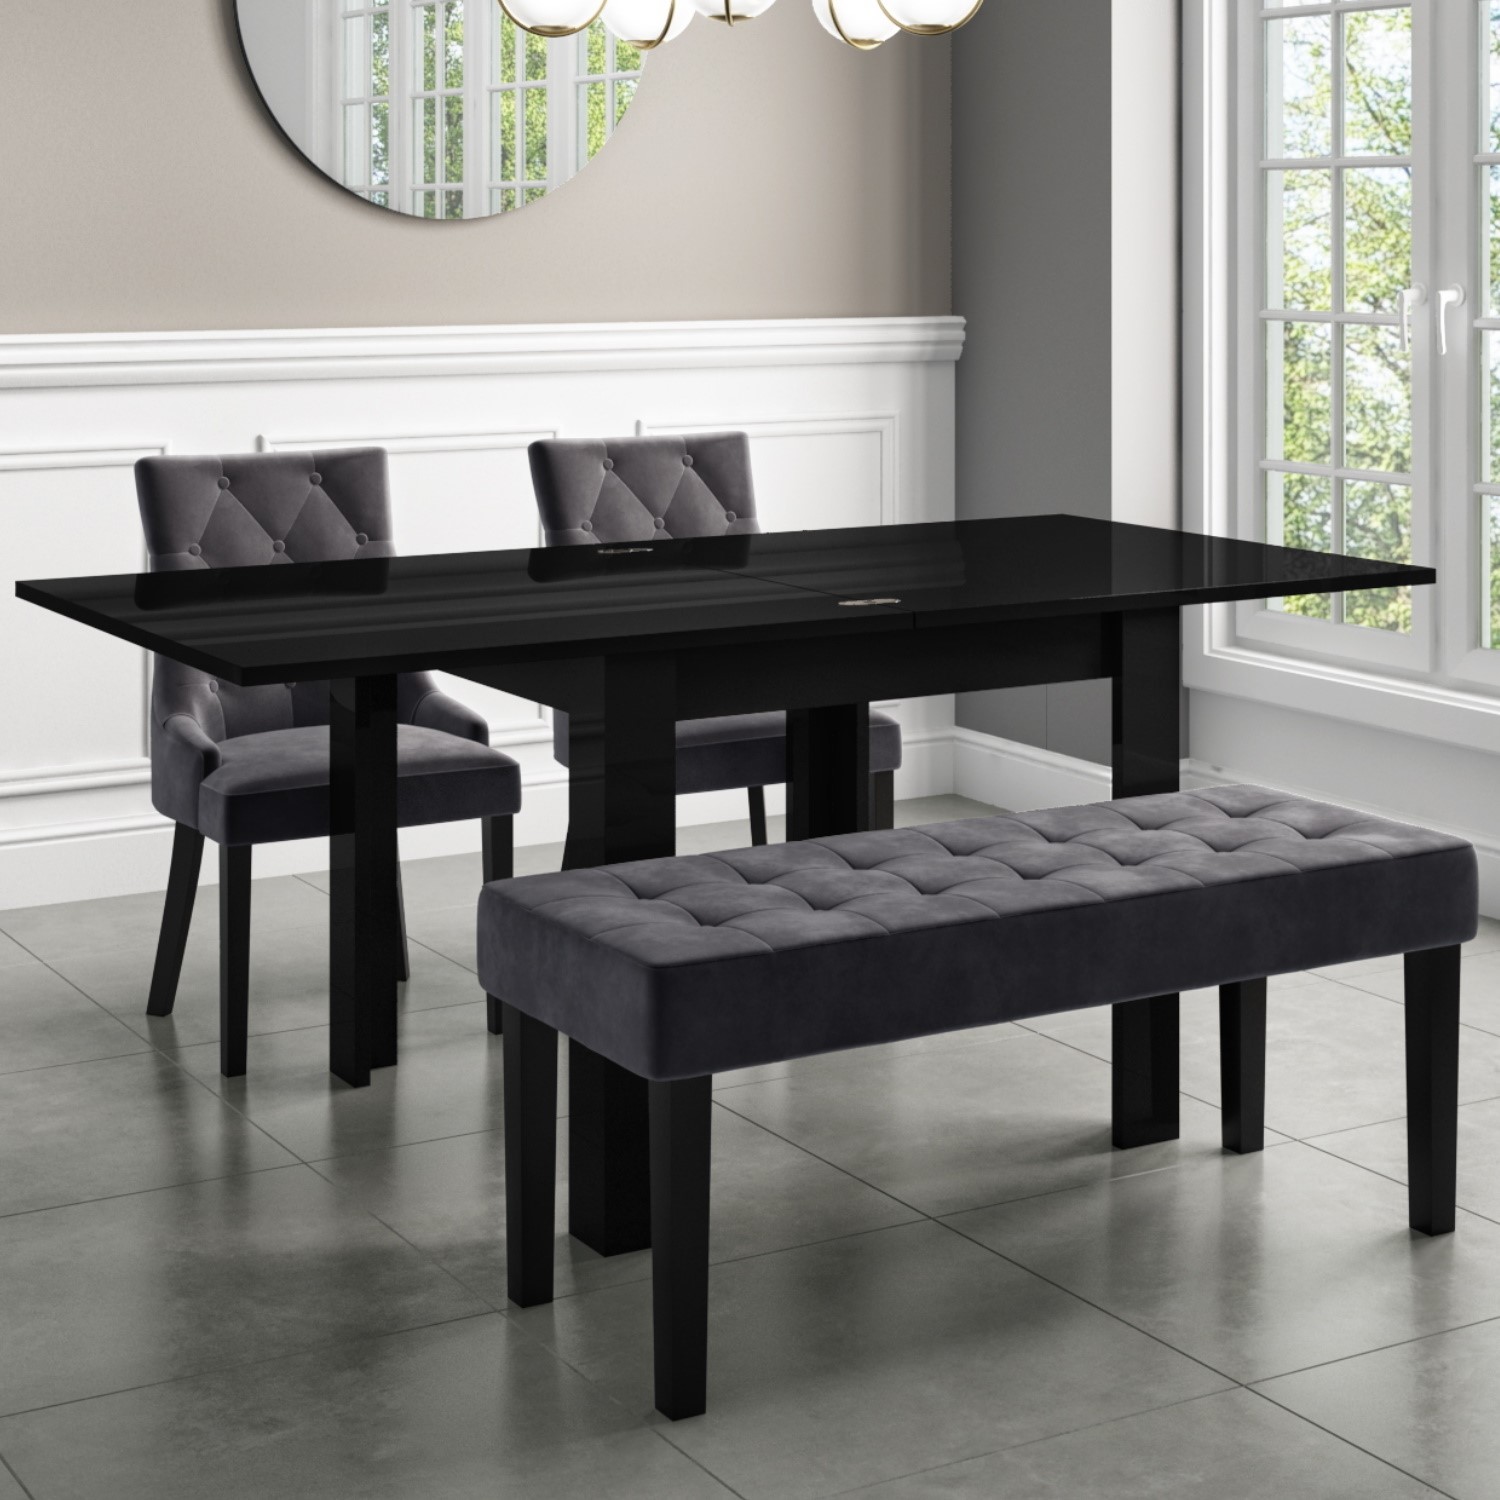 Flip Top Dining Table In Black High Gloss With 2 Grey Velvet Chairs 1 Bench Vivienne Kaylee Furniture123